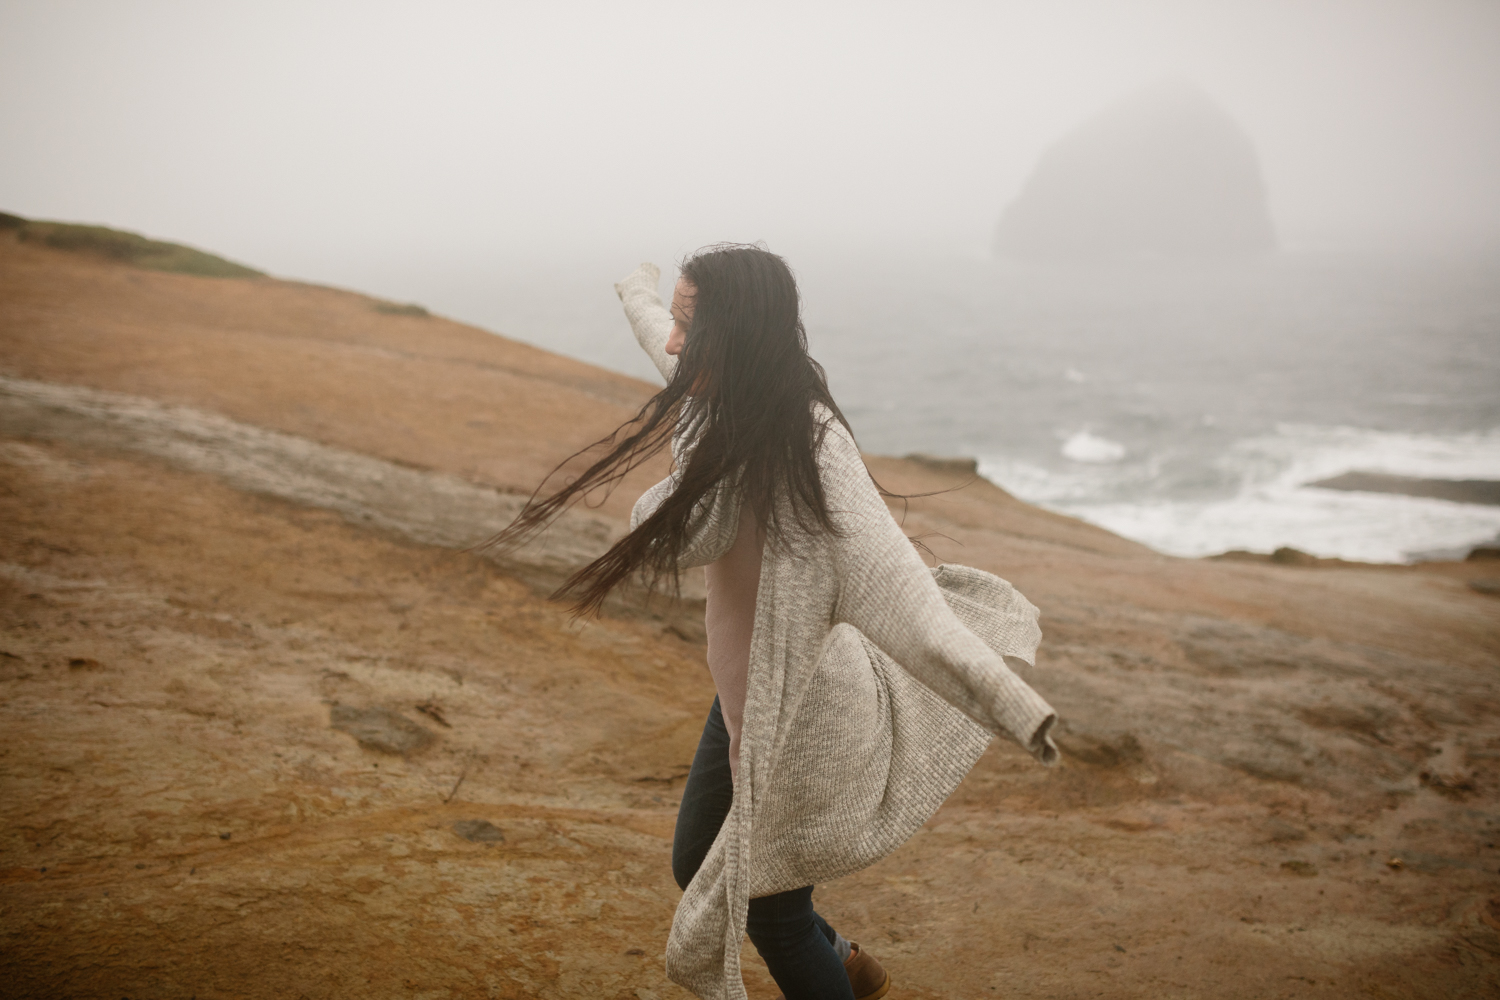 A portrait of young woman with wind blowing through her hair and